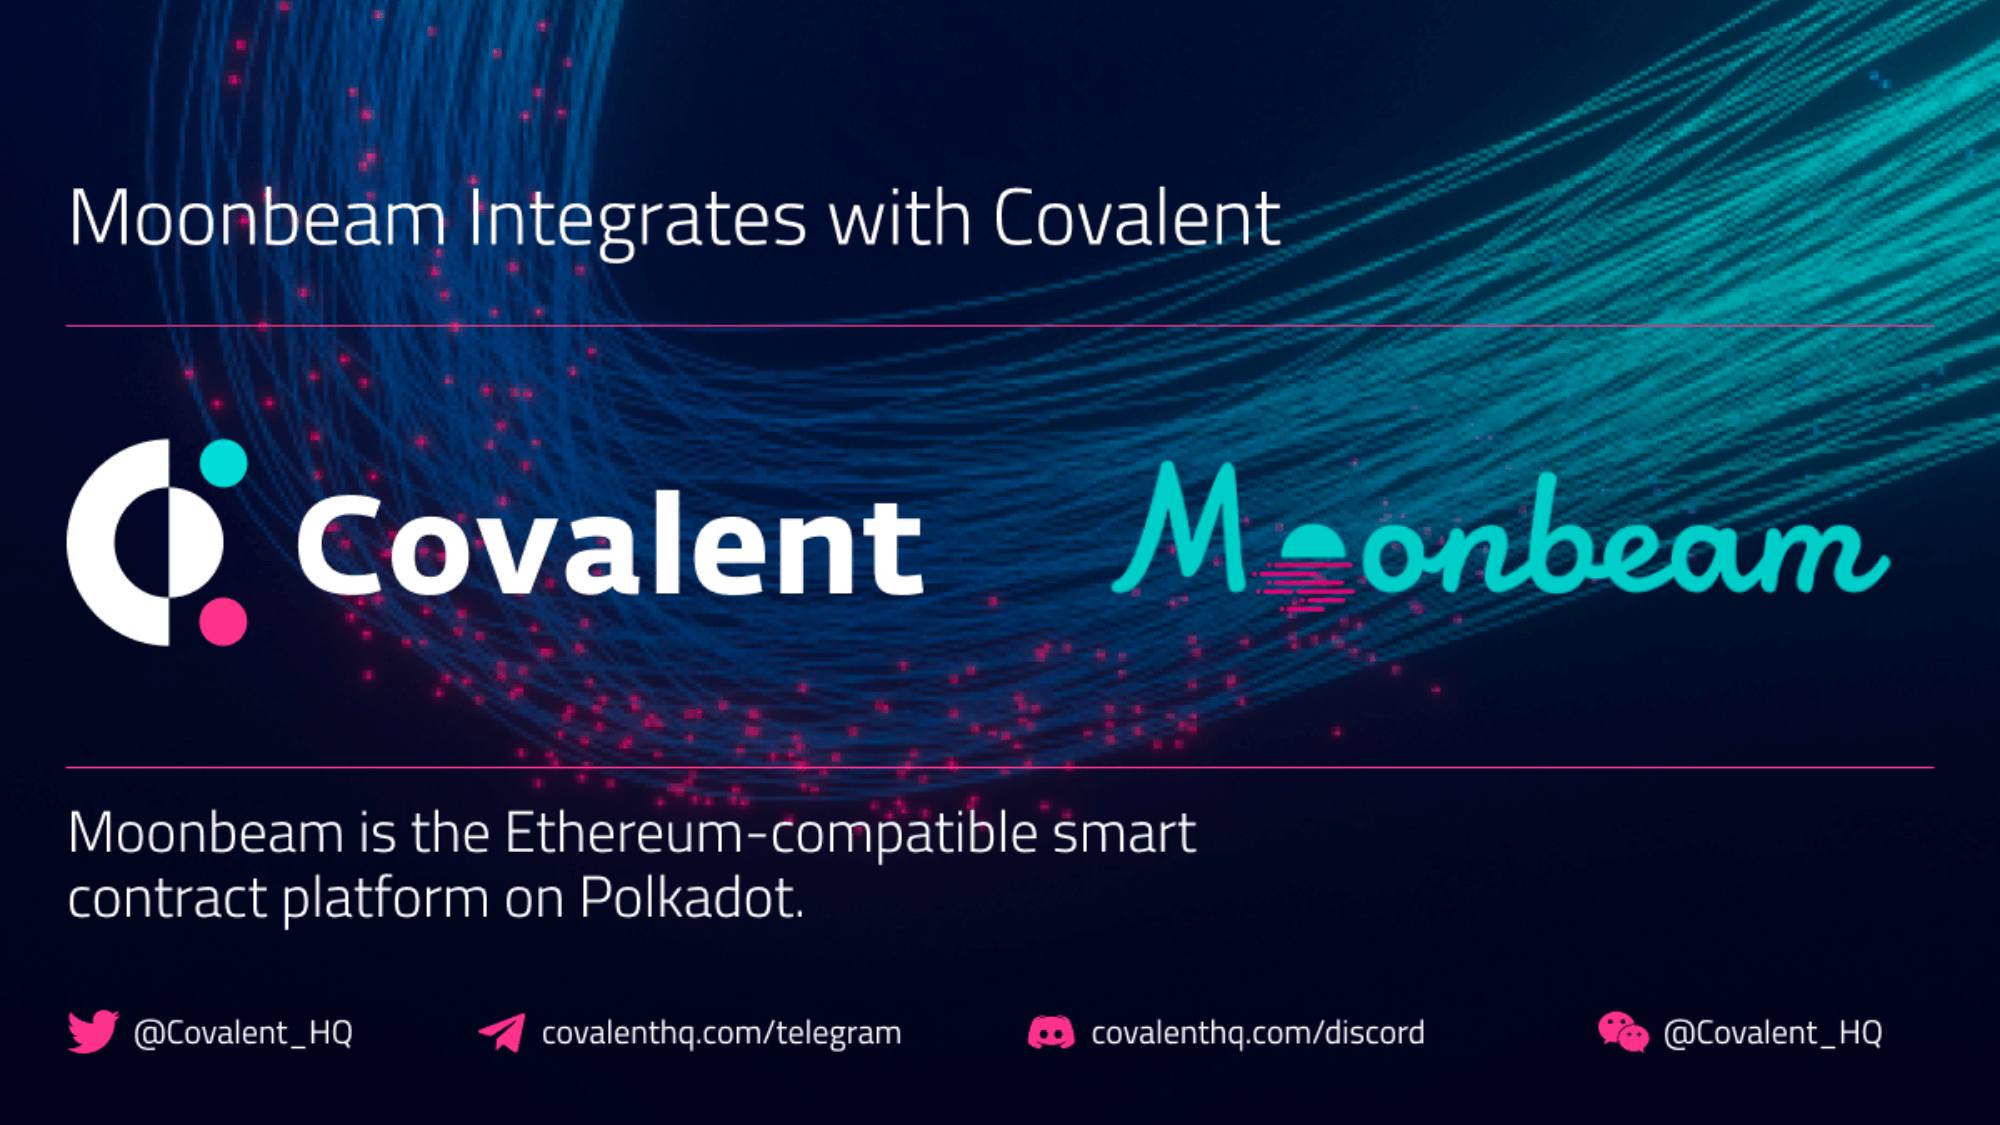 Moonbeam Integrates with Covalent